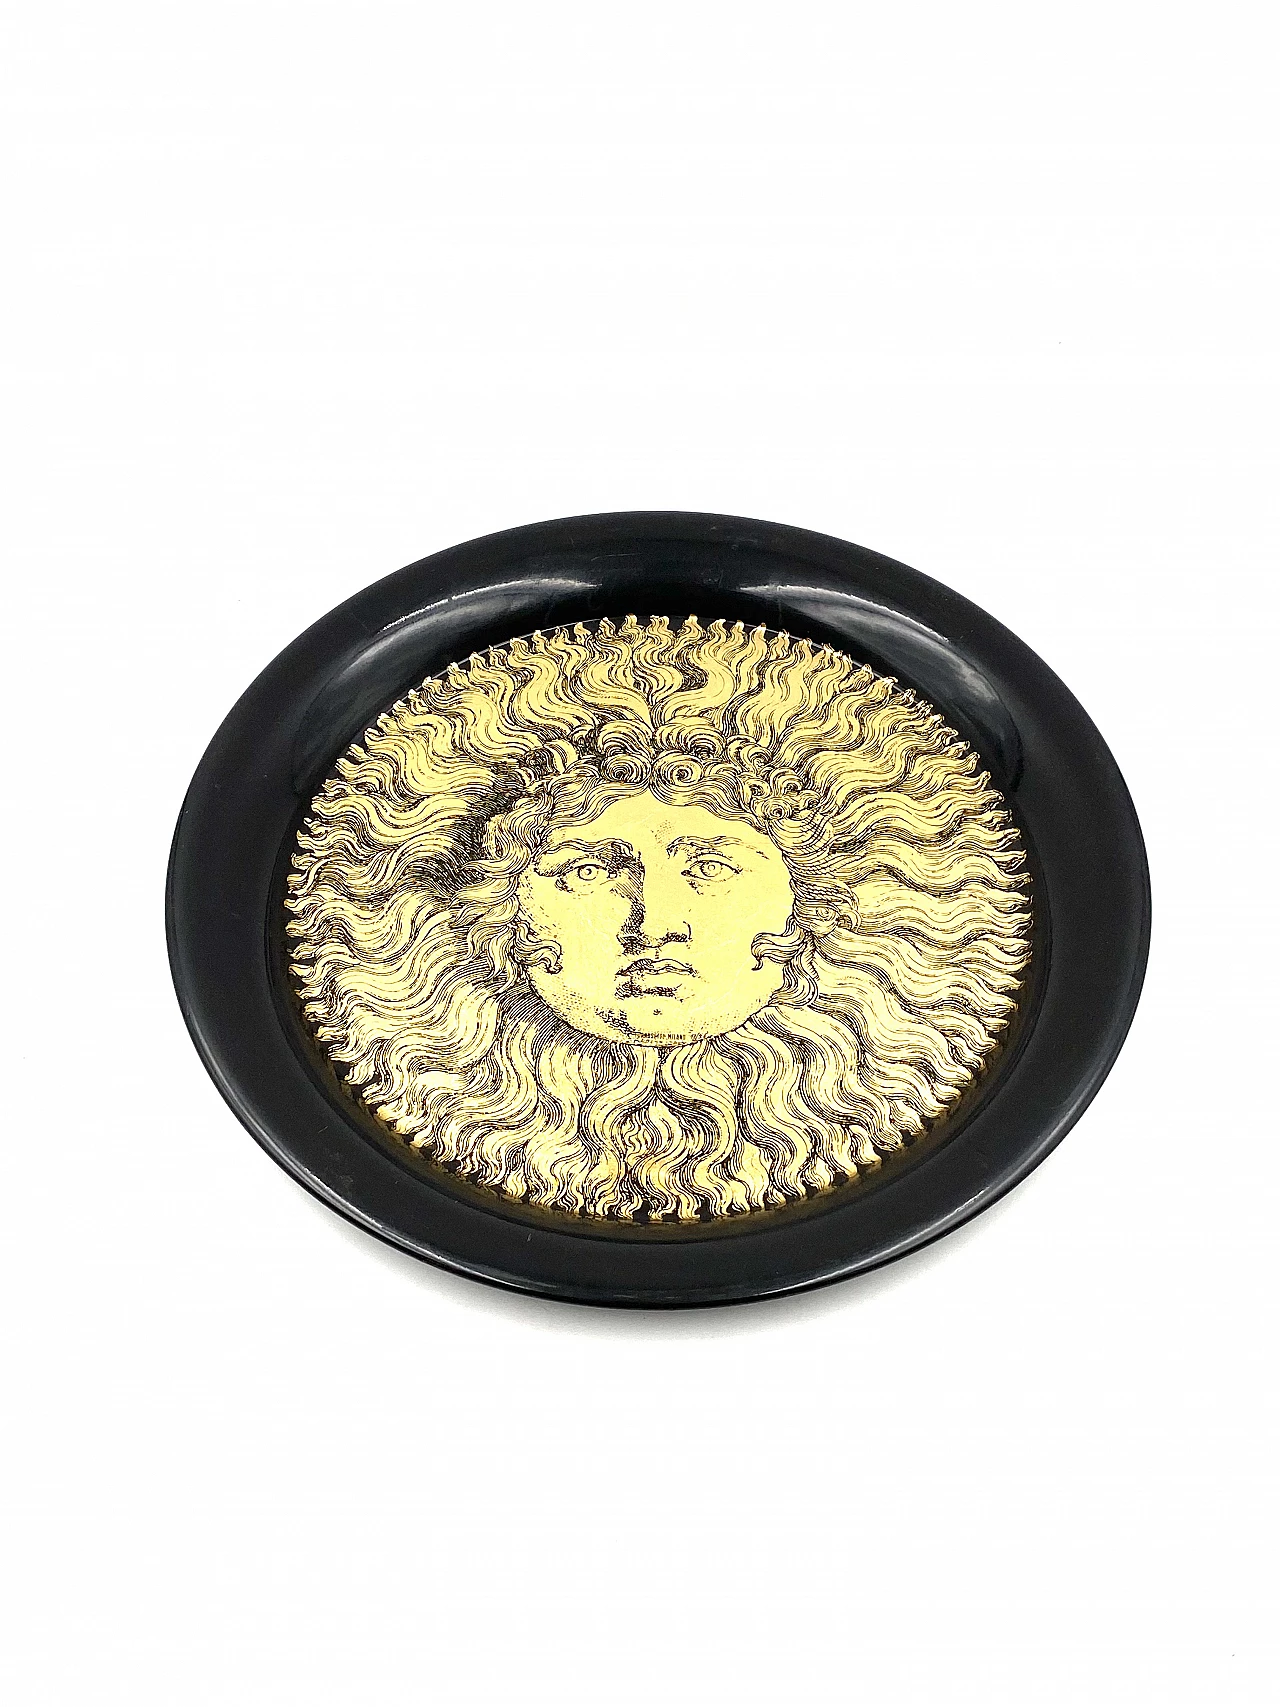 Metal Re Sole tray by Piero Fornasetti, 1950s 22